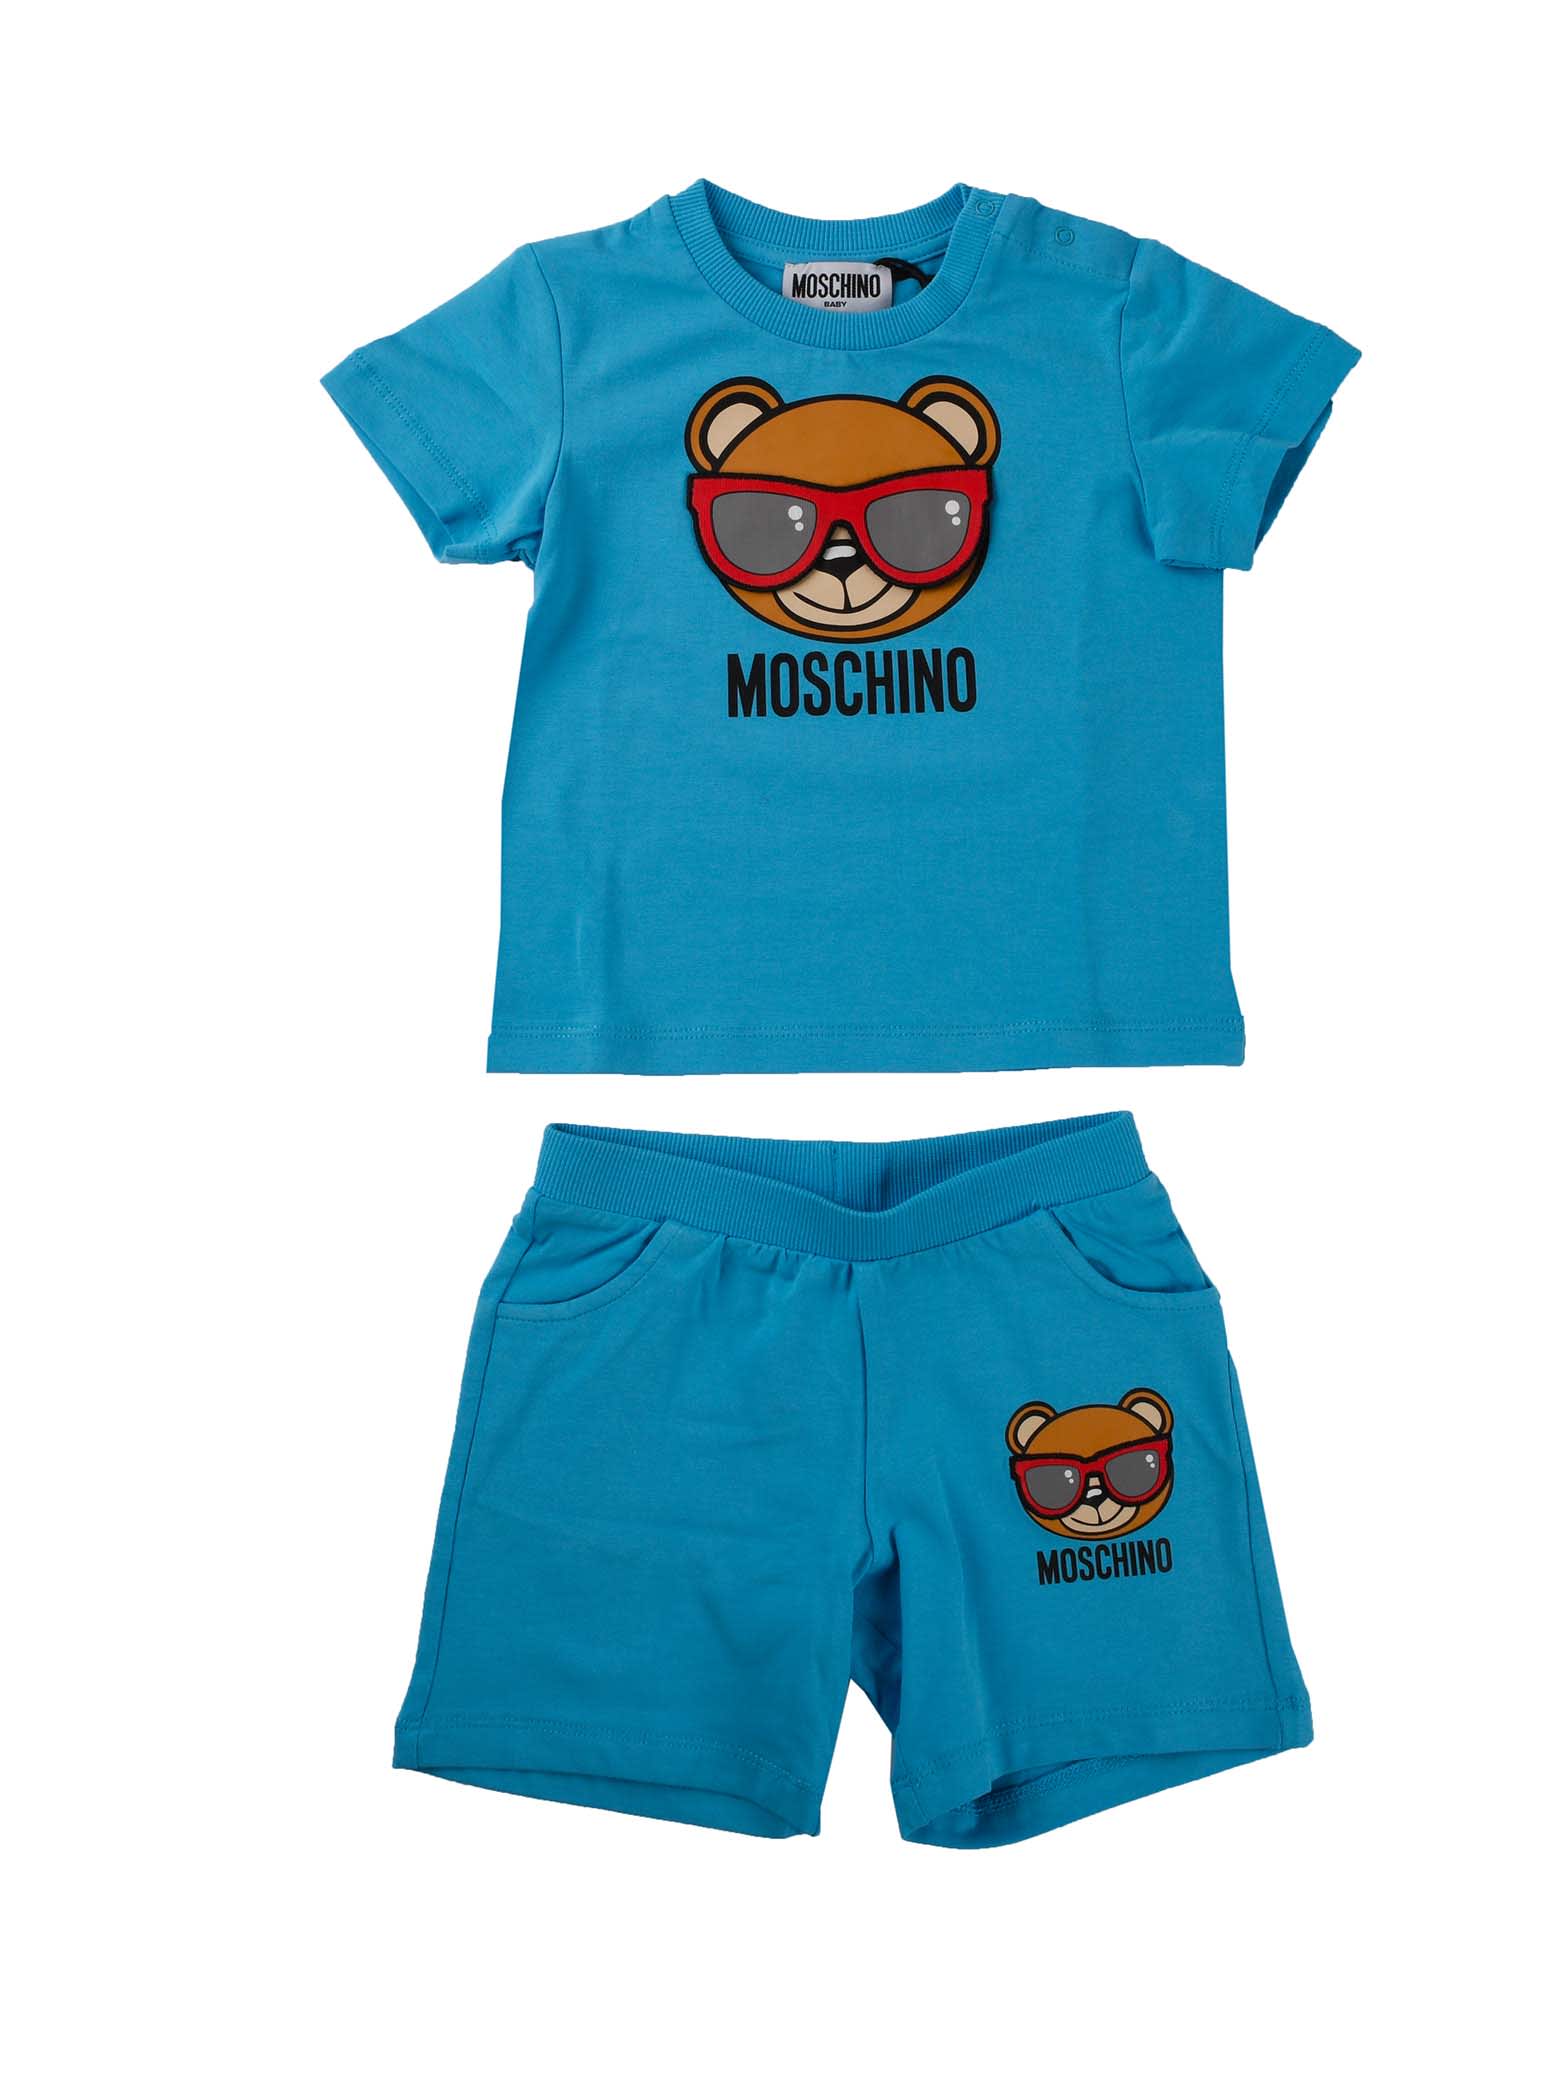 Moschino Turquoise Jersey Set With Bear Print